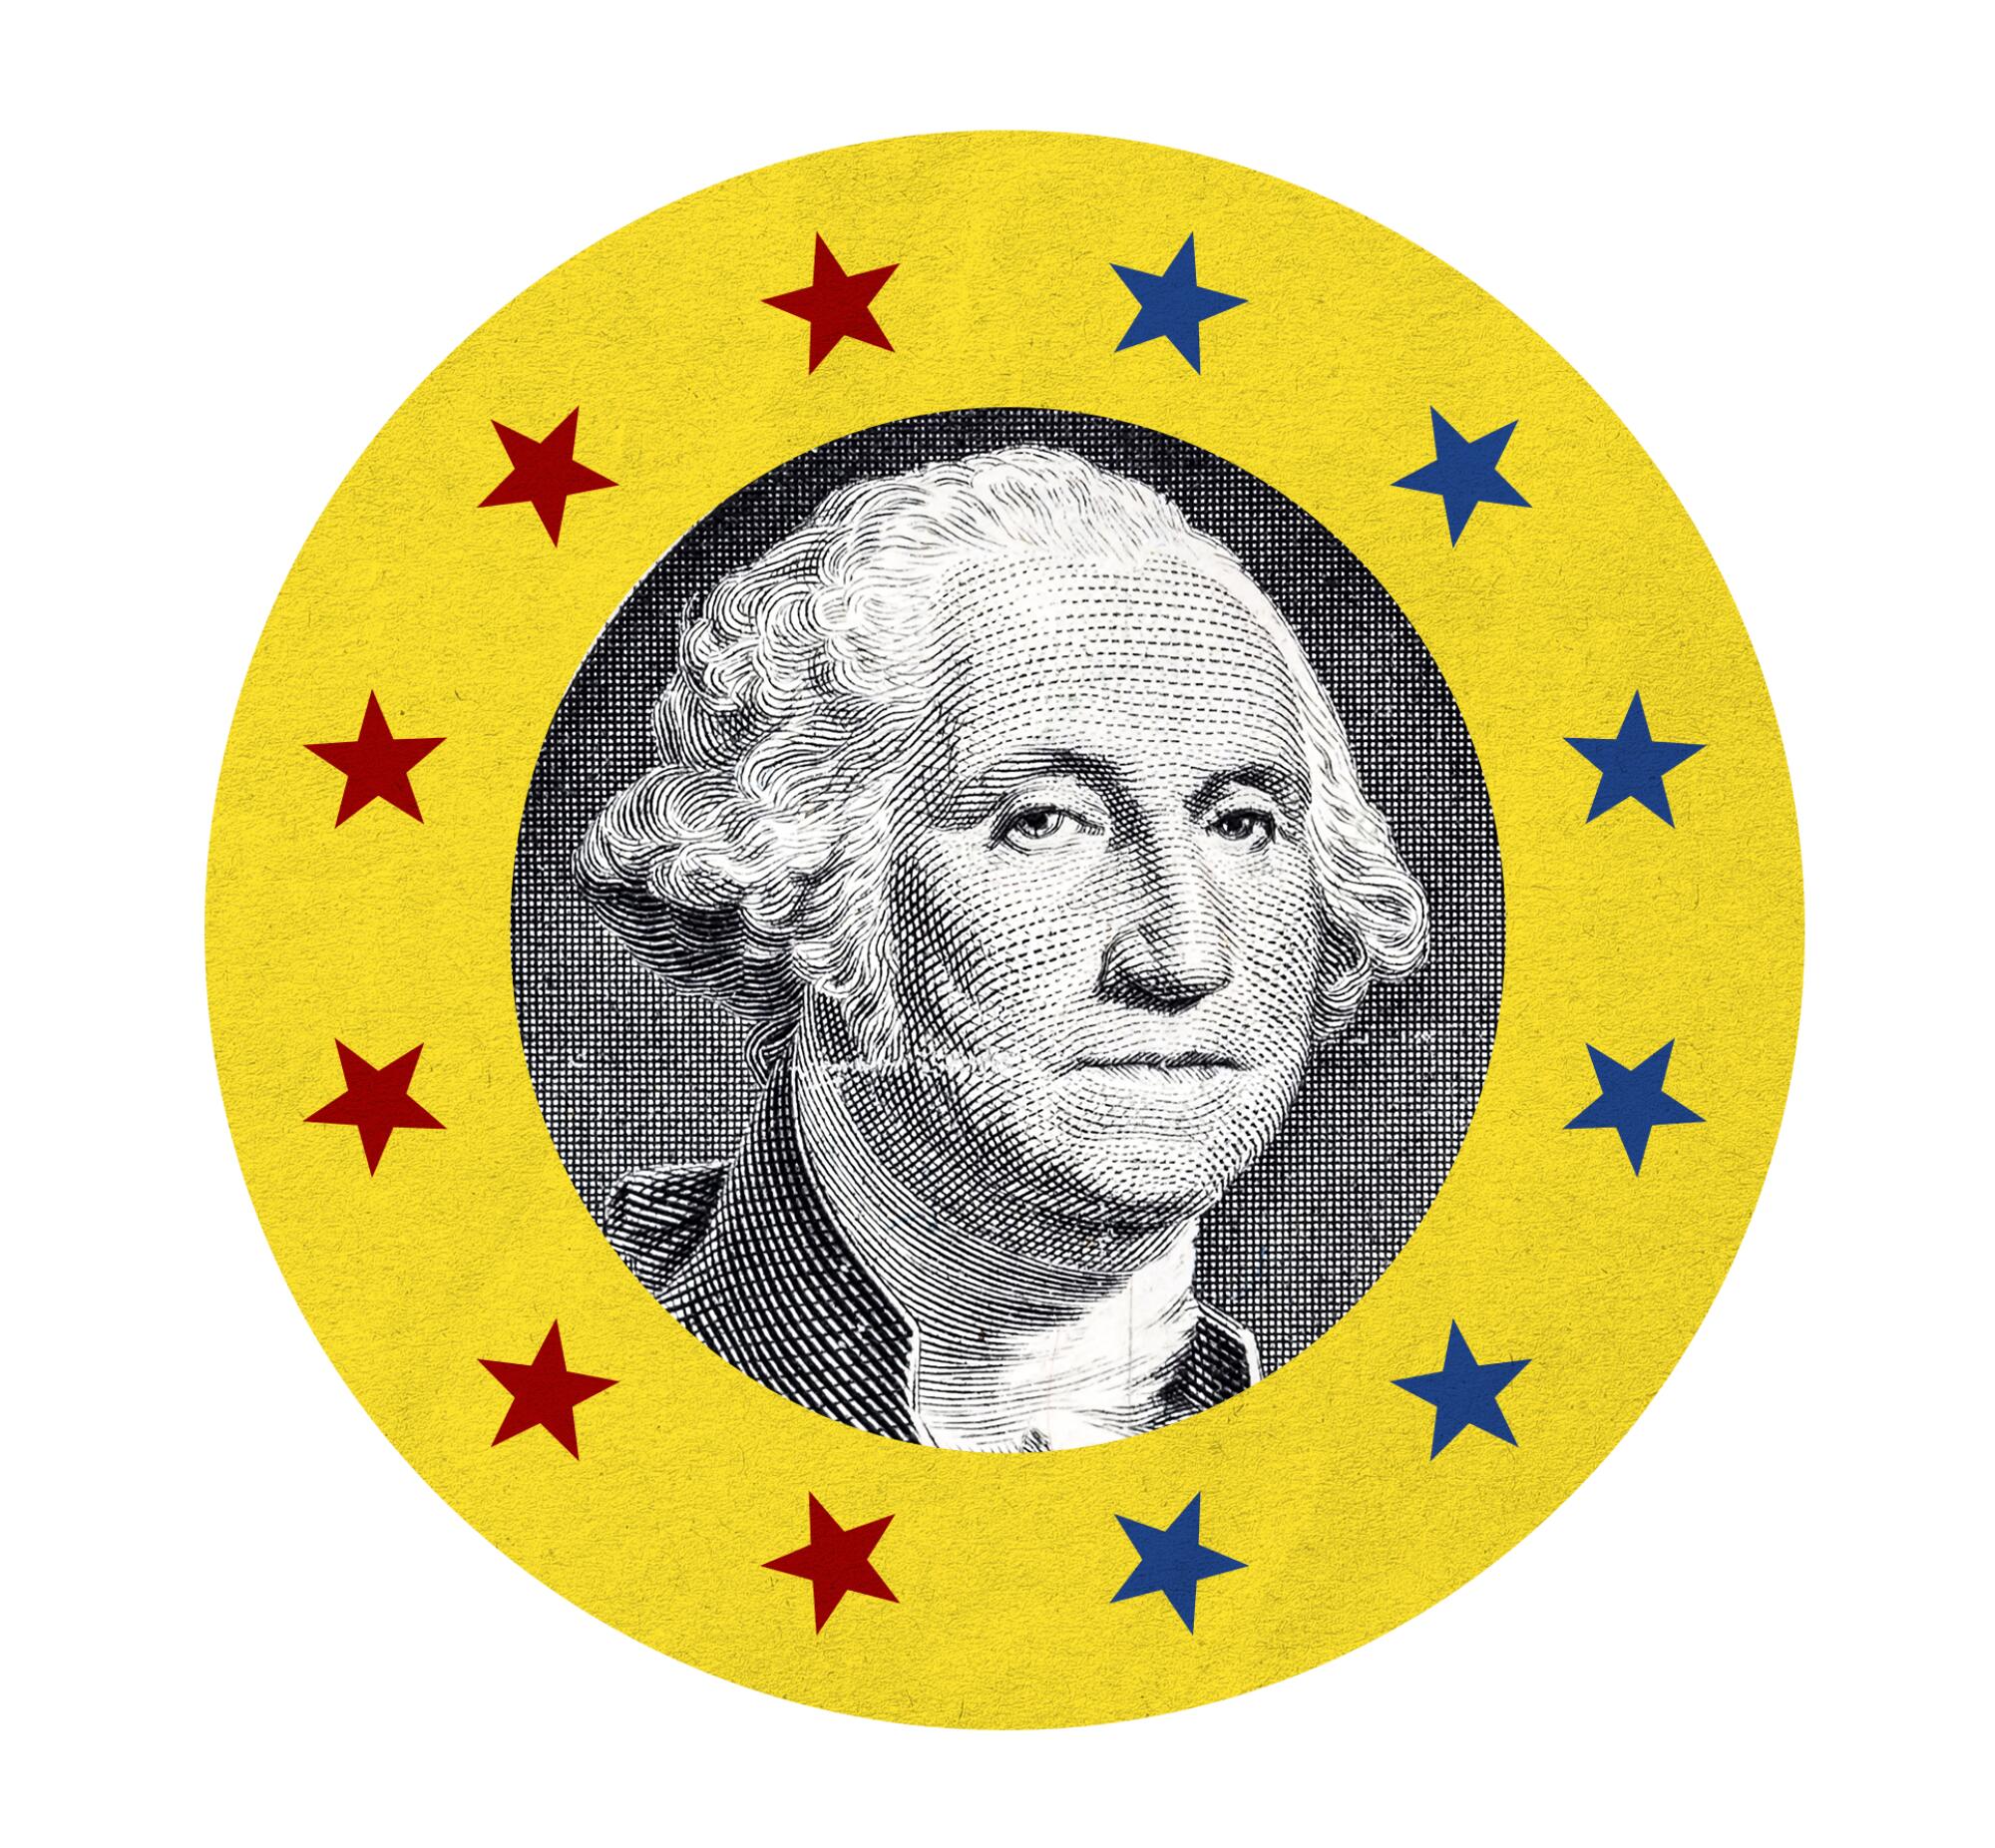 close up of George Washington on the dollar bill in a yellow circle with stars